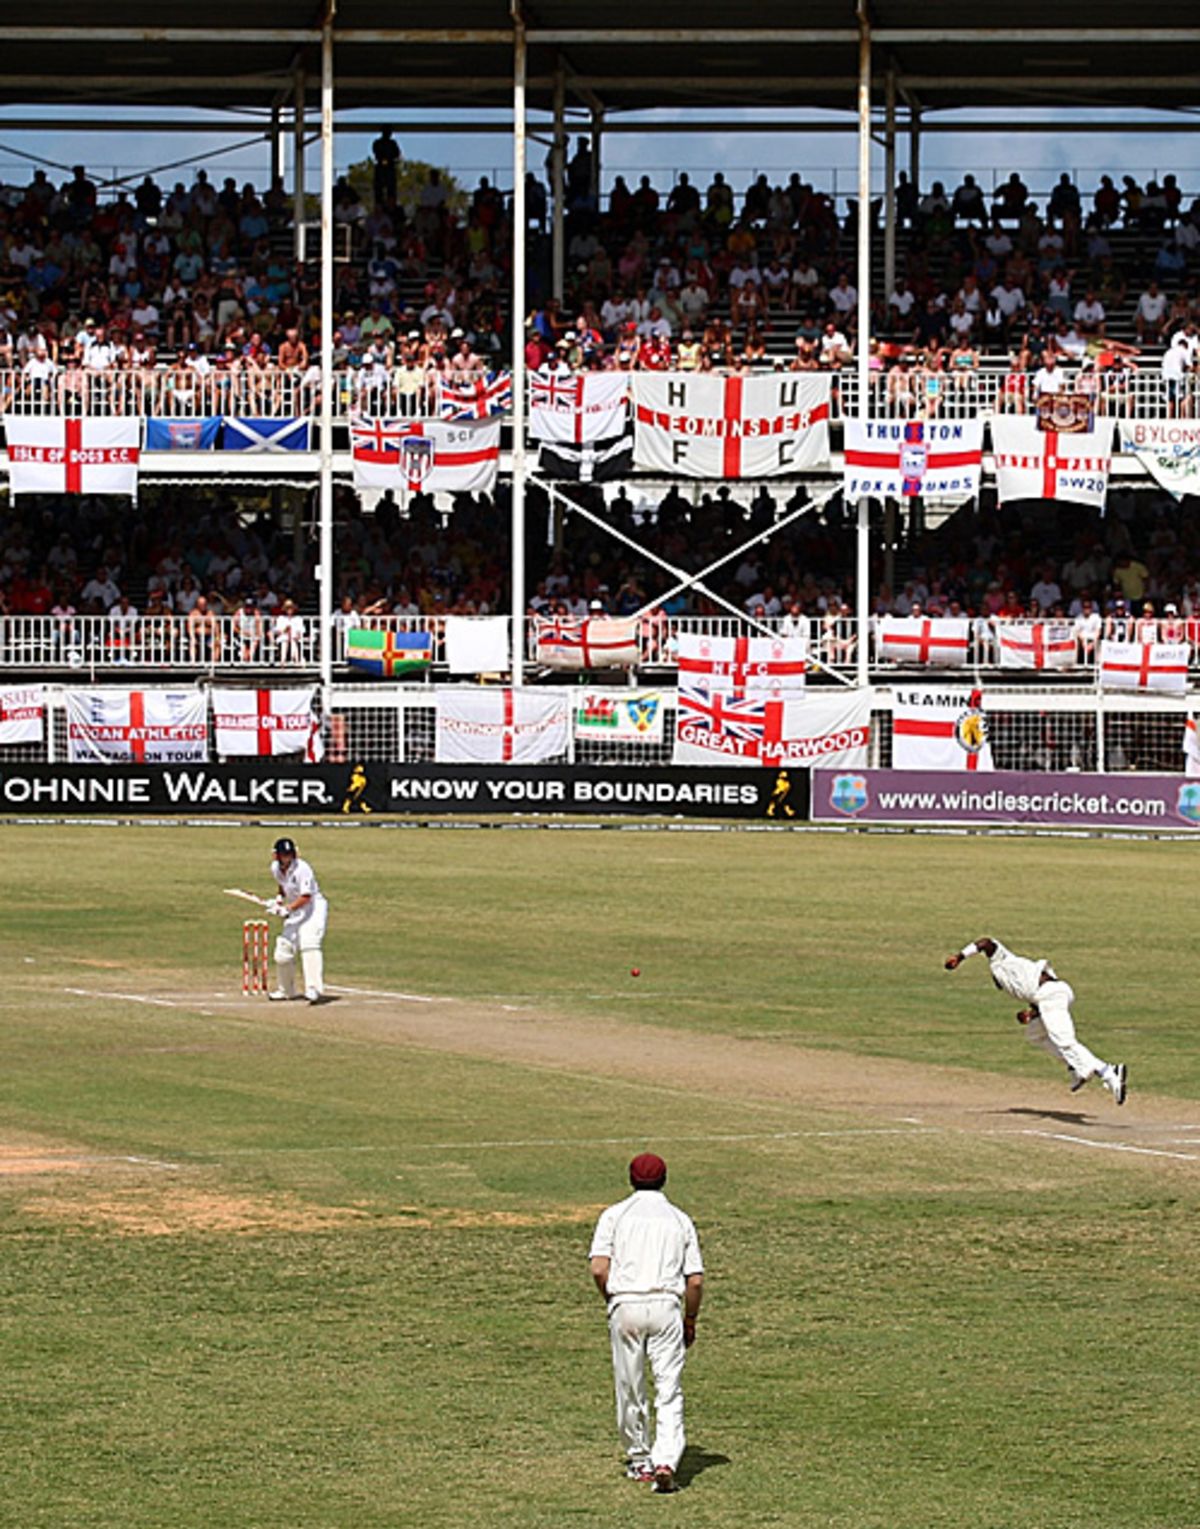 Paul Collingwood waits for a delivery in front of a host of Barmy Army fans at the Antigua Recreation Ground, West Indies v England, 3rd Test, Antigua, February 16, 2009